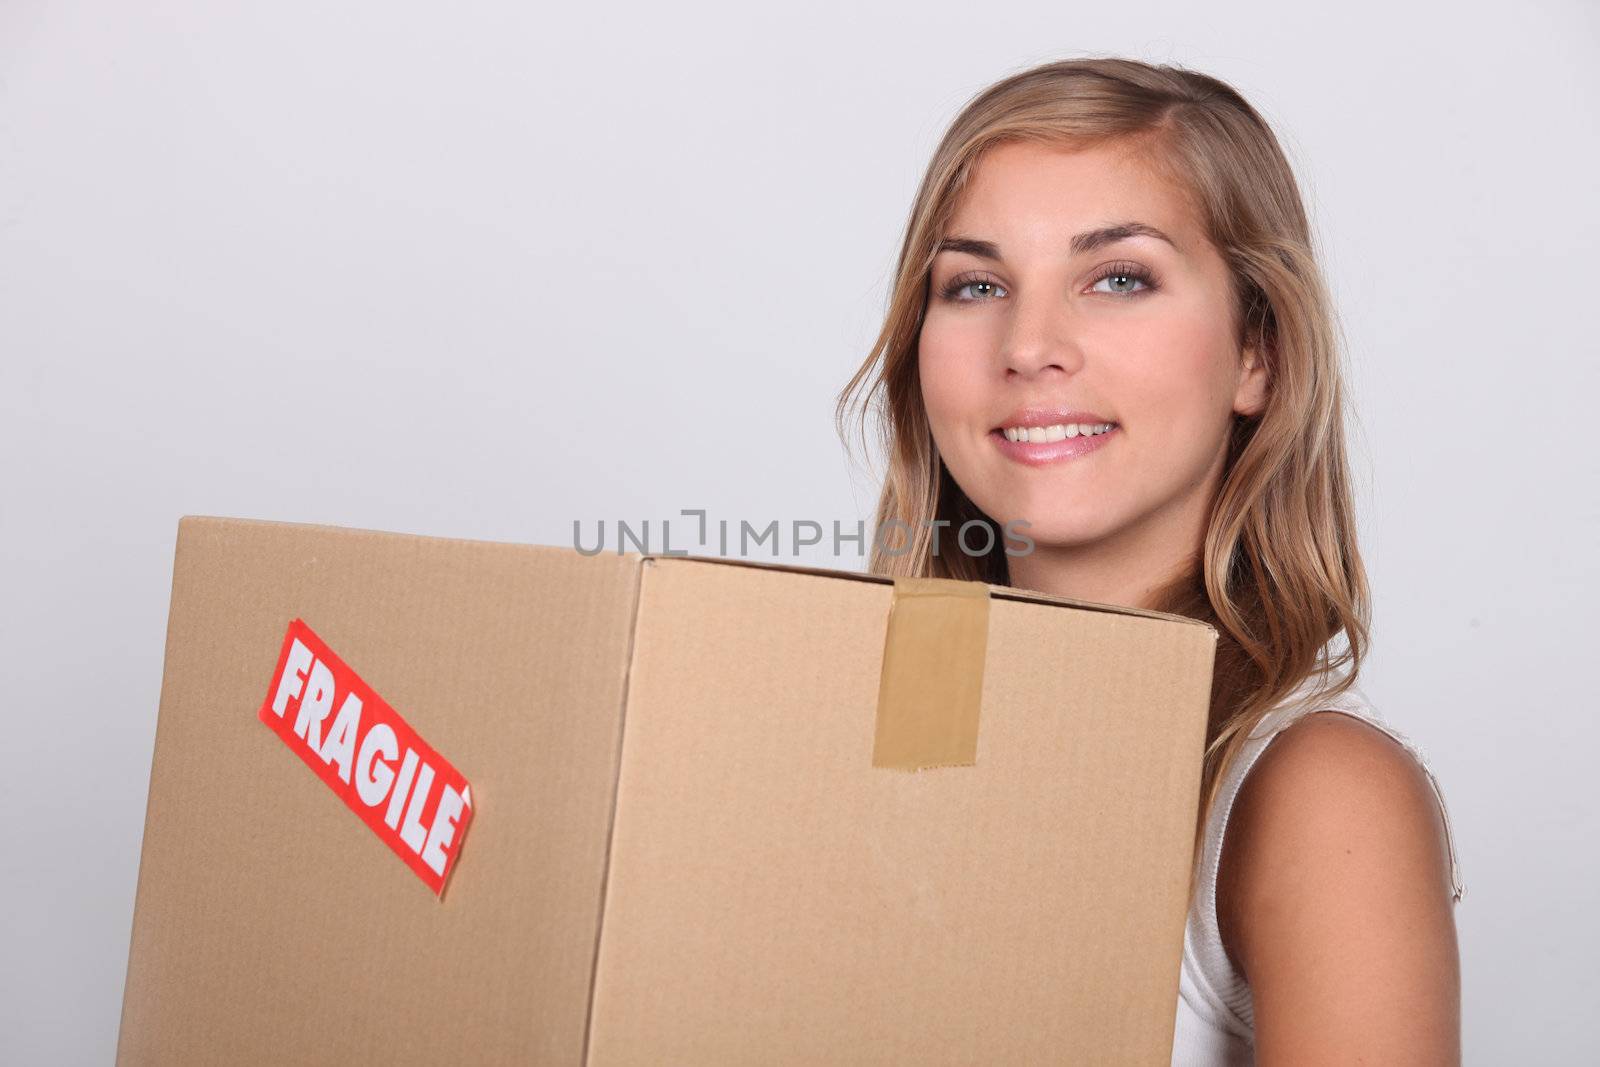 Young woman with a cardboard